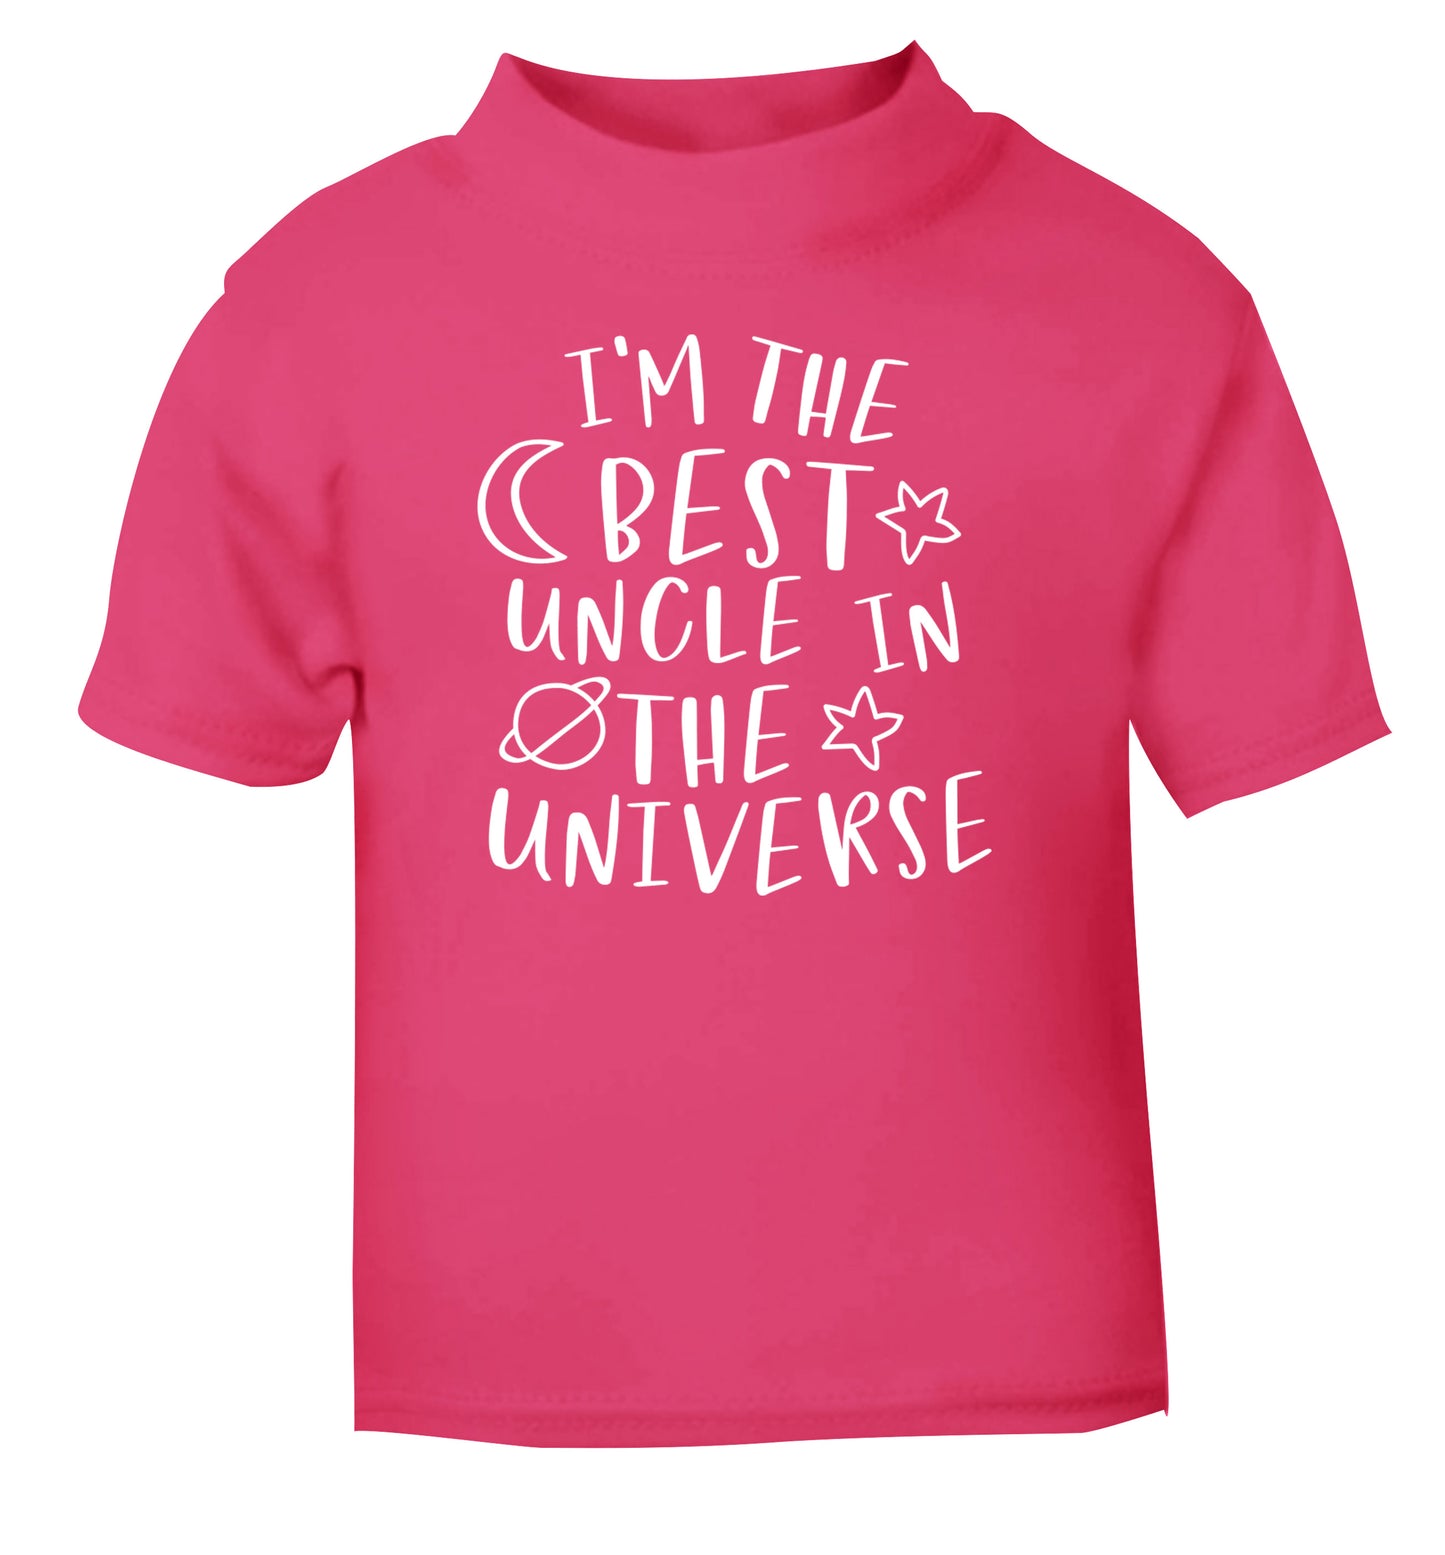 I'm the best uncle in the universe pink Baby Toddler Tshirt 2 Years